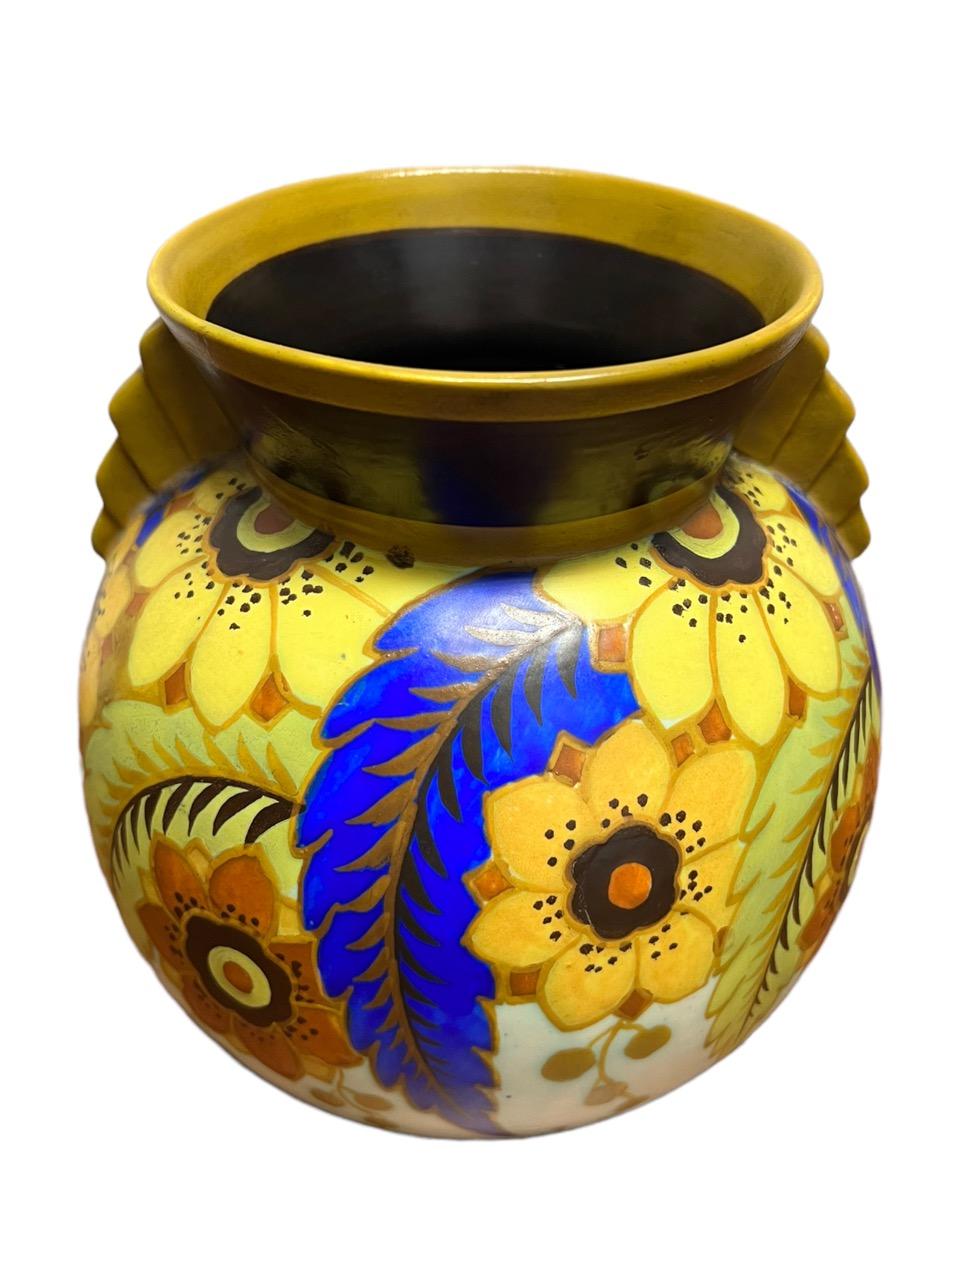 20th Century 1920s Floral Vase by Artist Charles Catteau